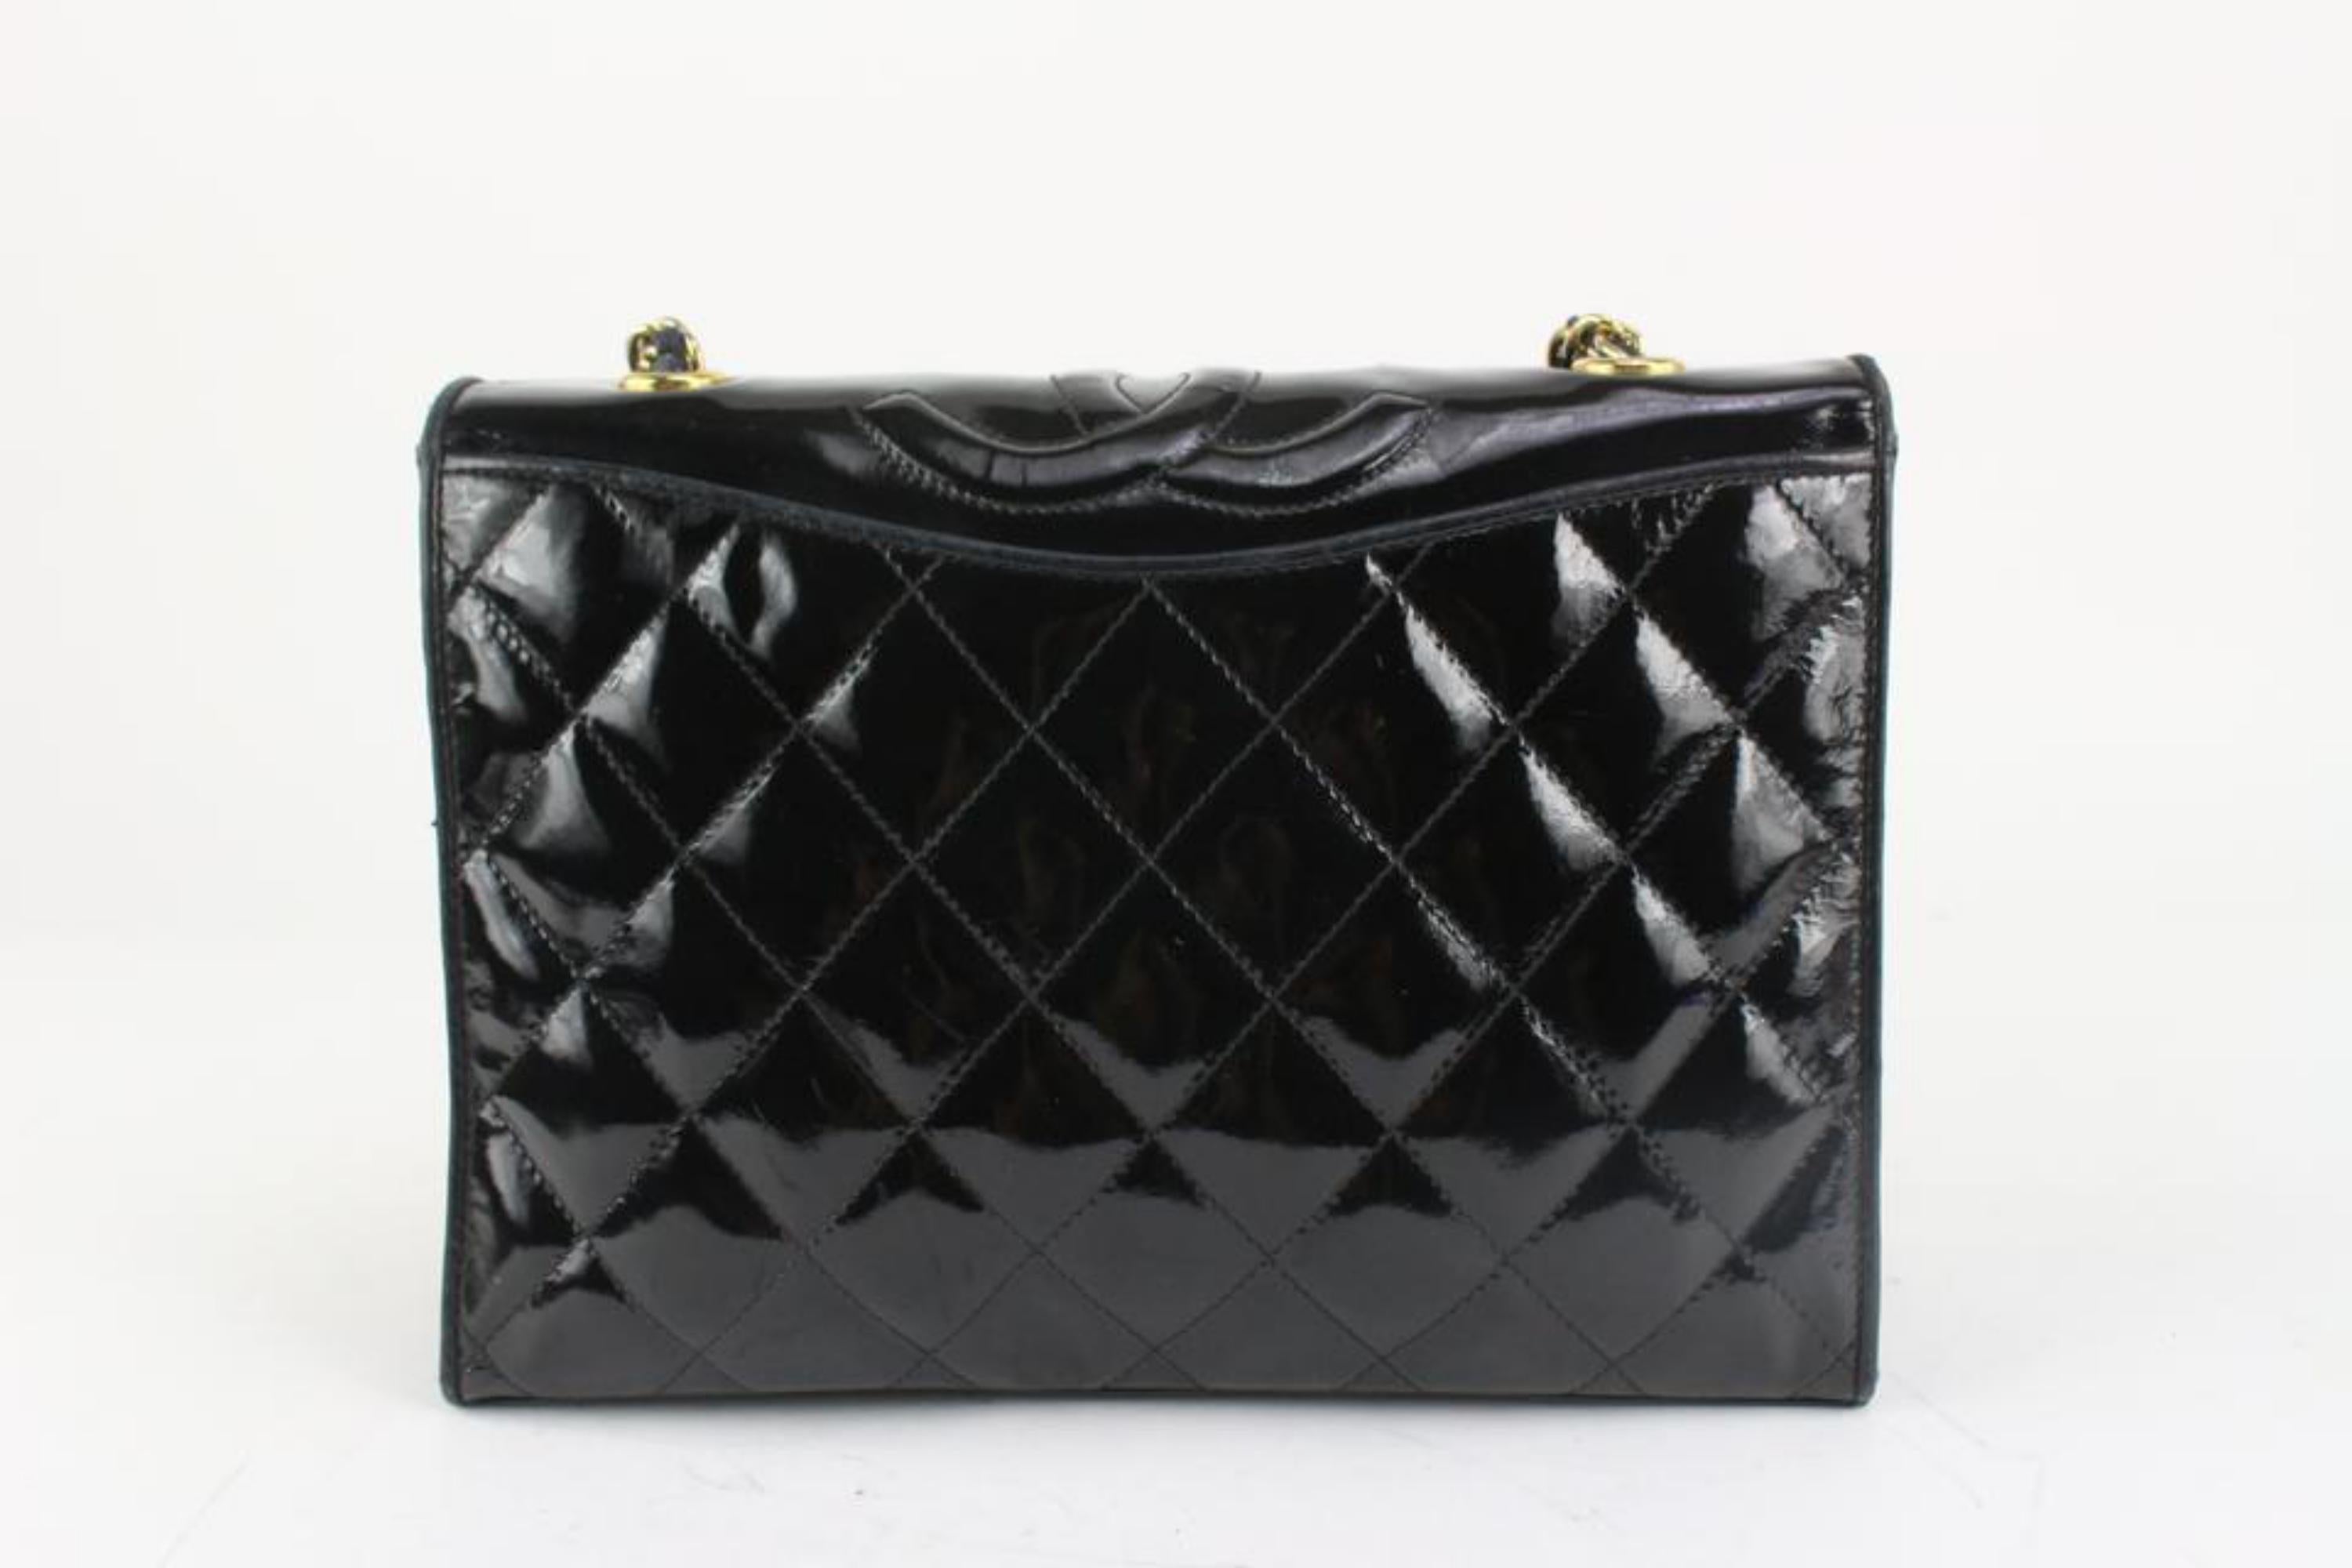 Chanel Black Quilted Patent Round Top CC Flap Bag 1215c45 In Good Condition For Sale In Dix hills, NY